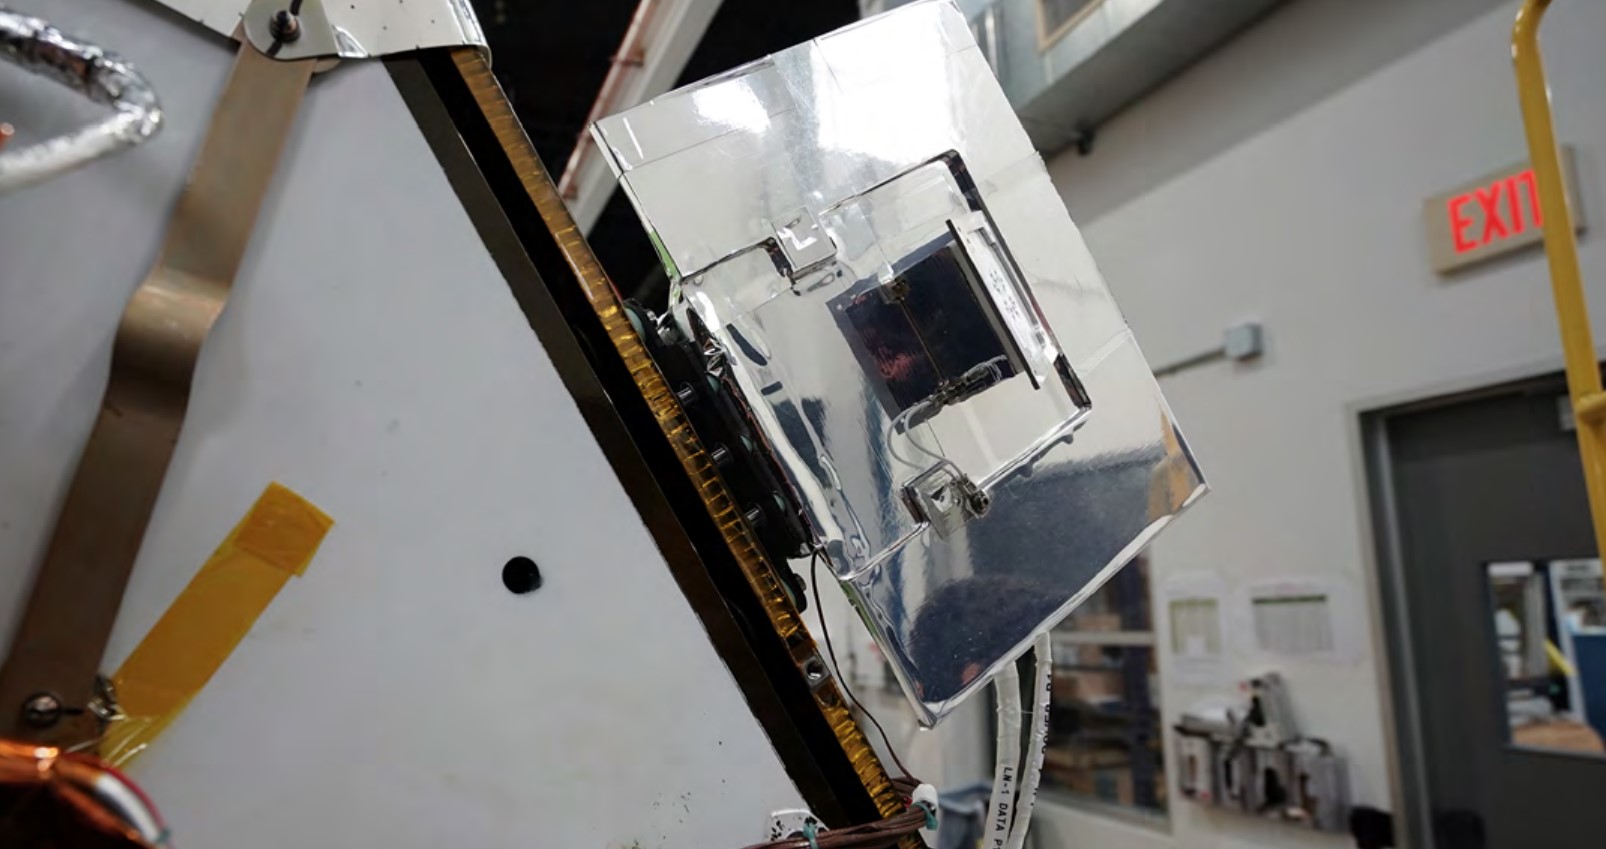 a small box wrapped in metallic foil on the side of a tall rectangular spacecraft on four legs